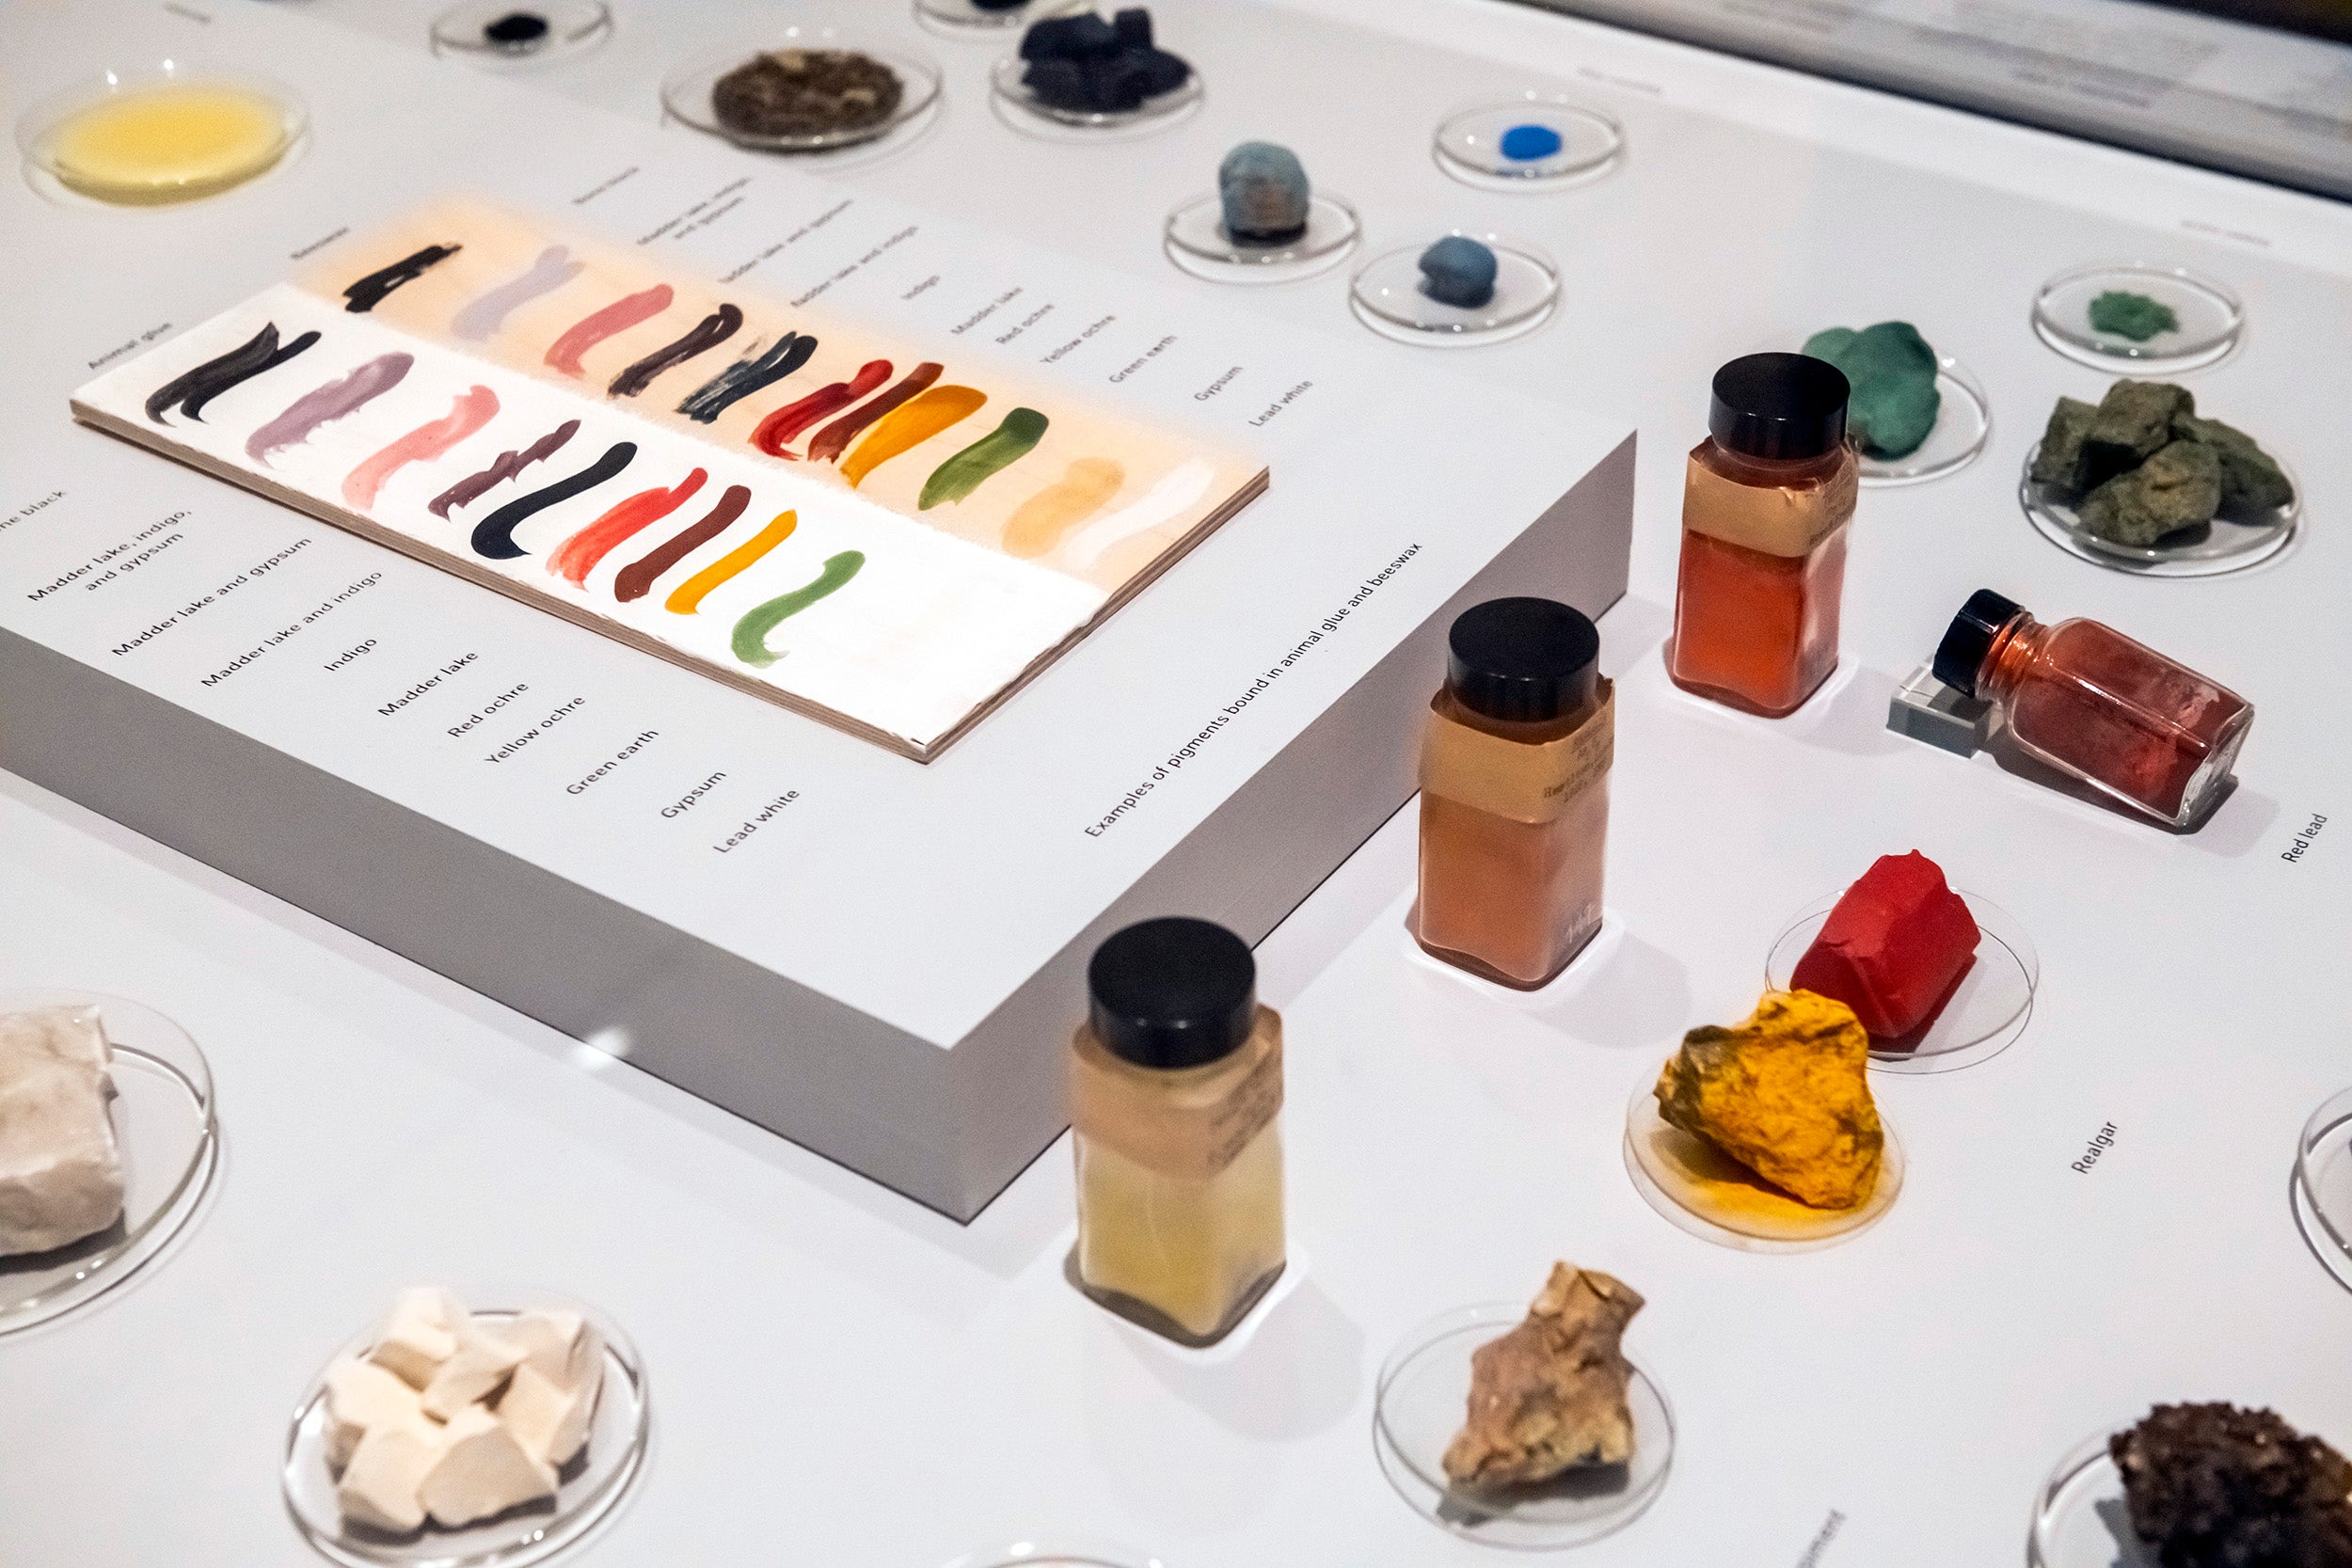 Exhibition of ancient pigments and binders.